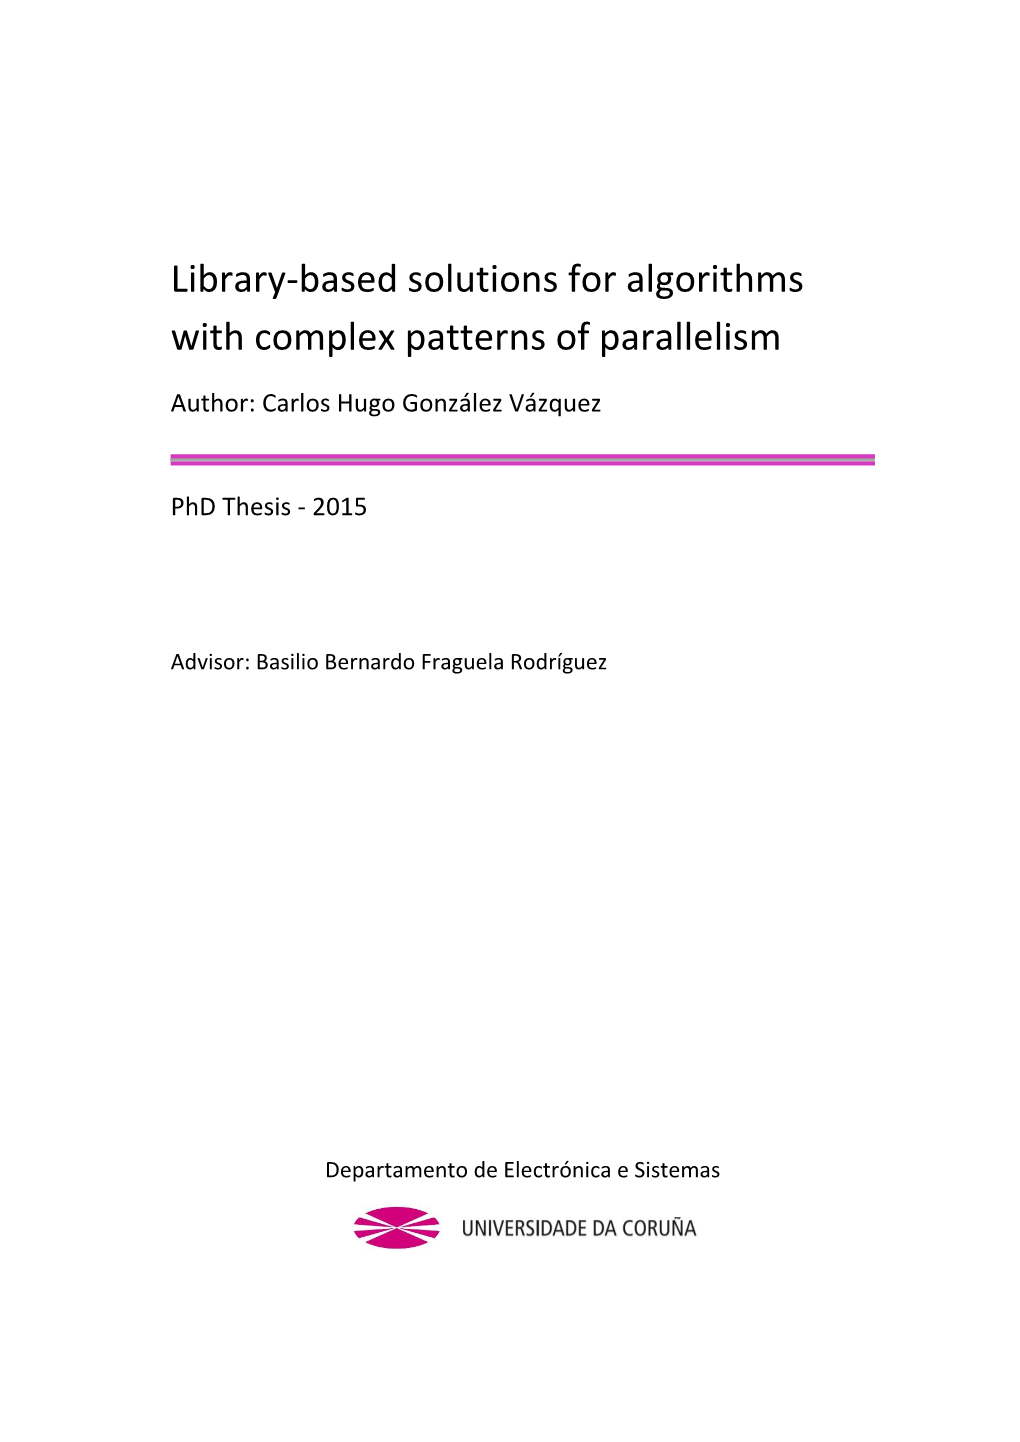 Library-Based Solutions for Algorithms with Complex Patterns of Parallelism